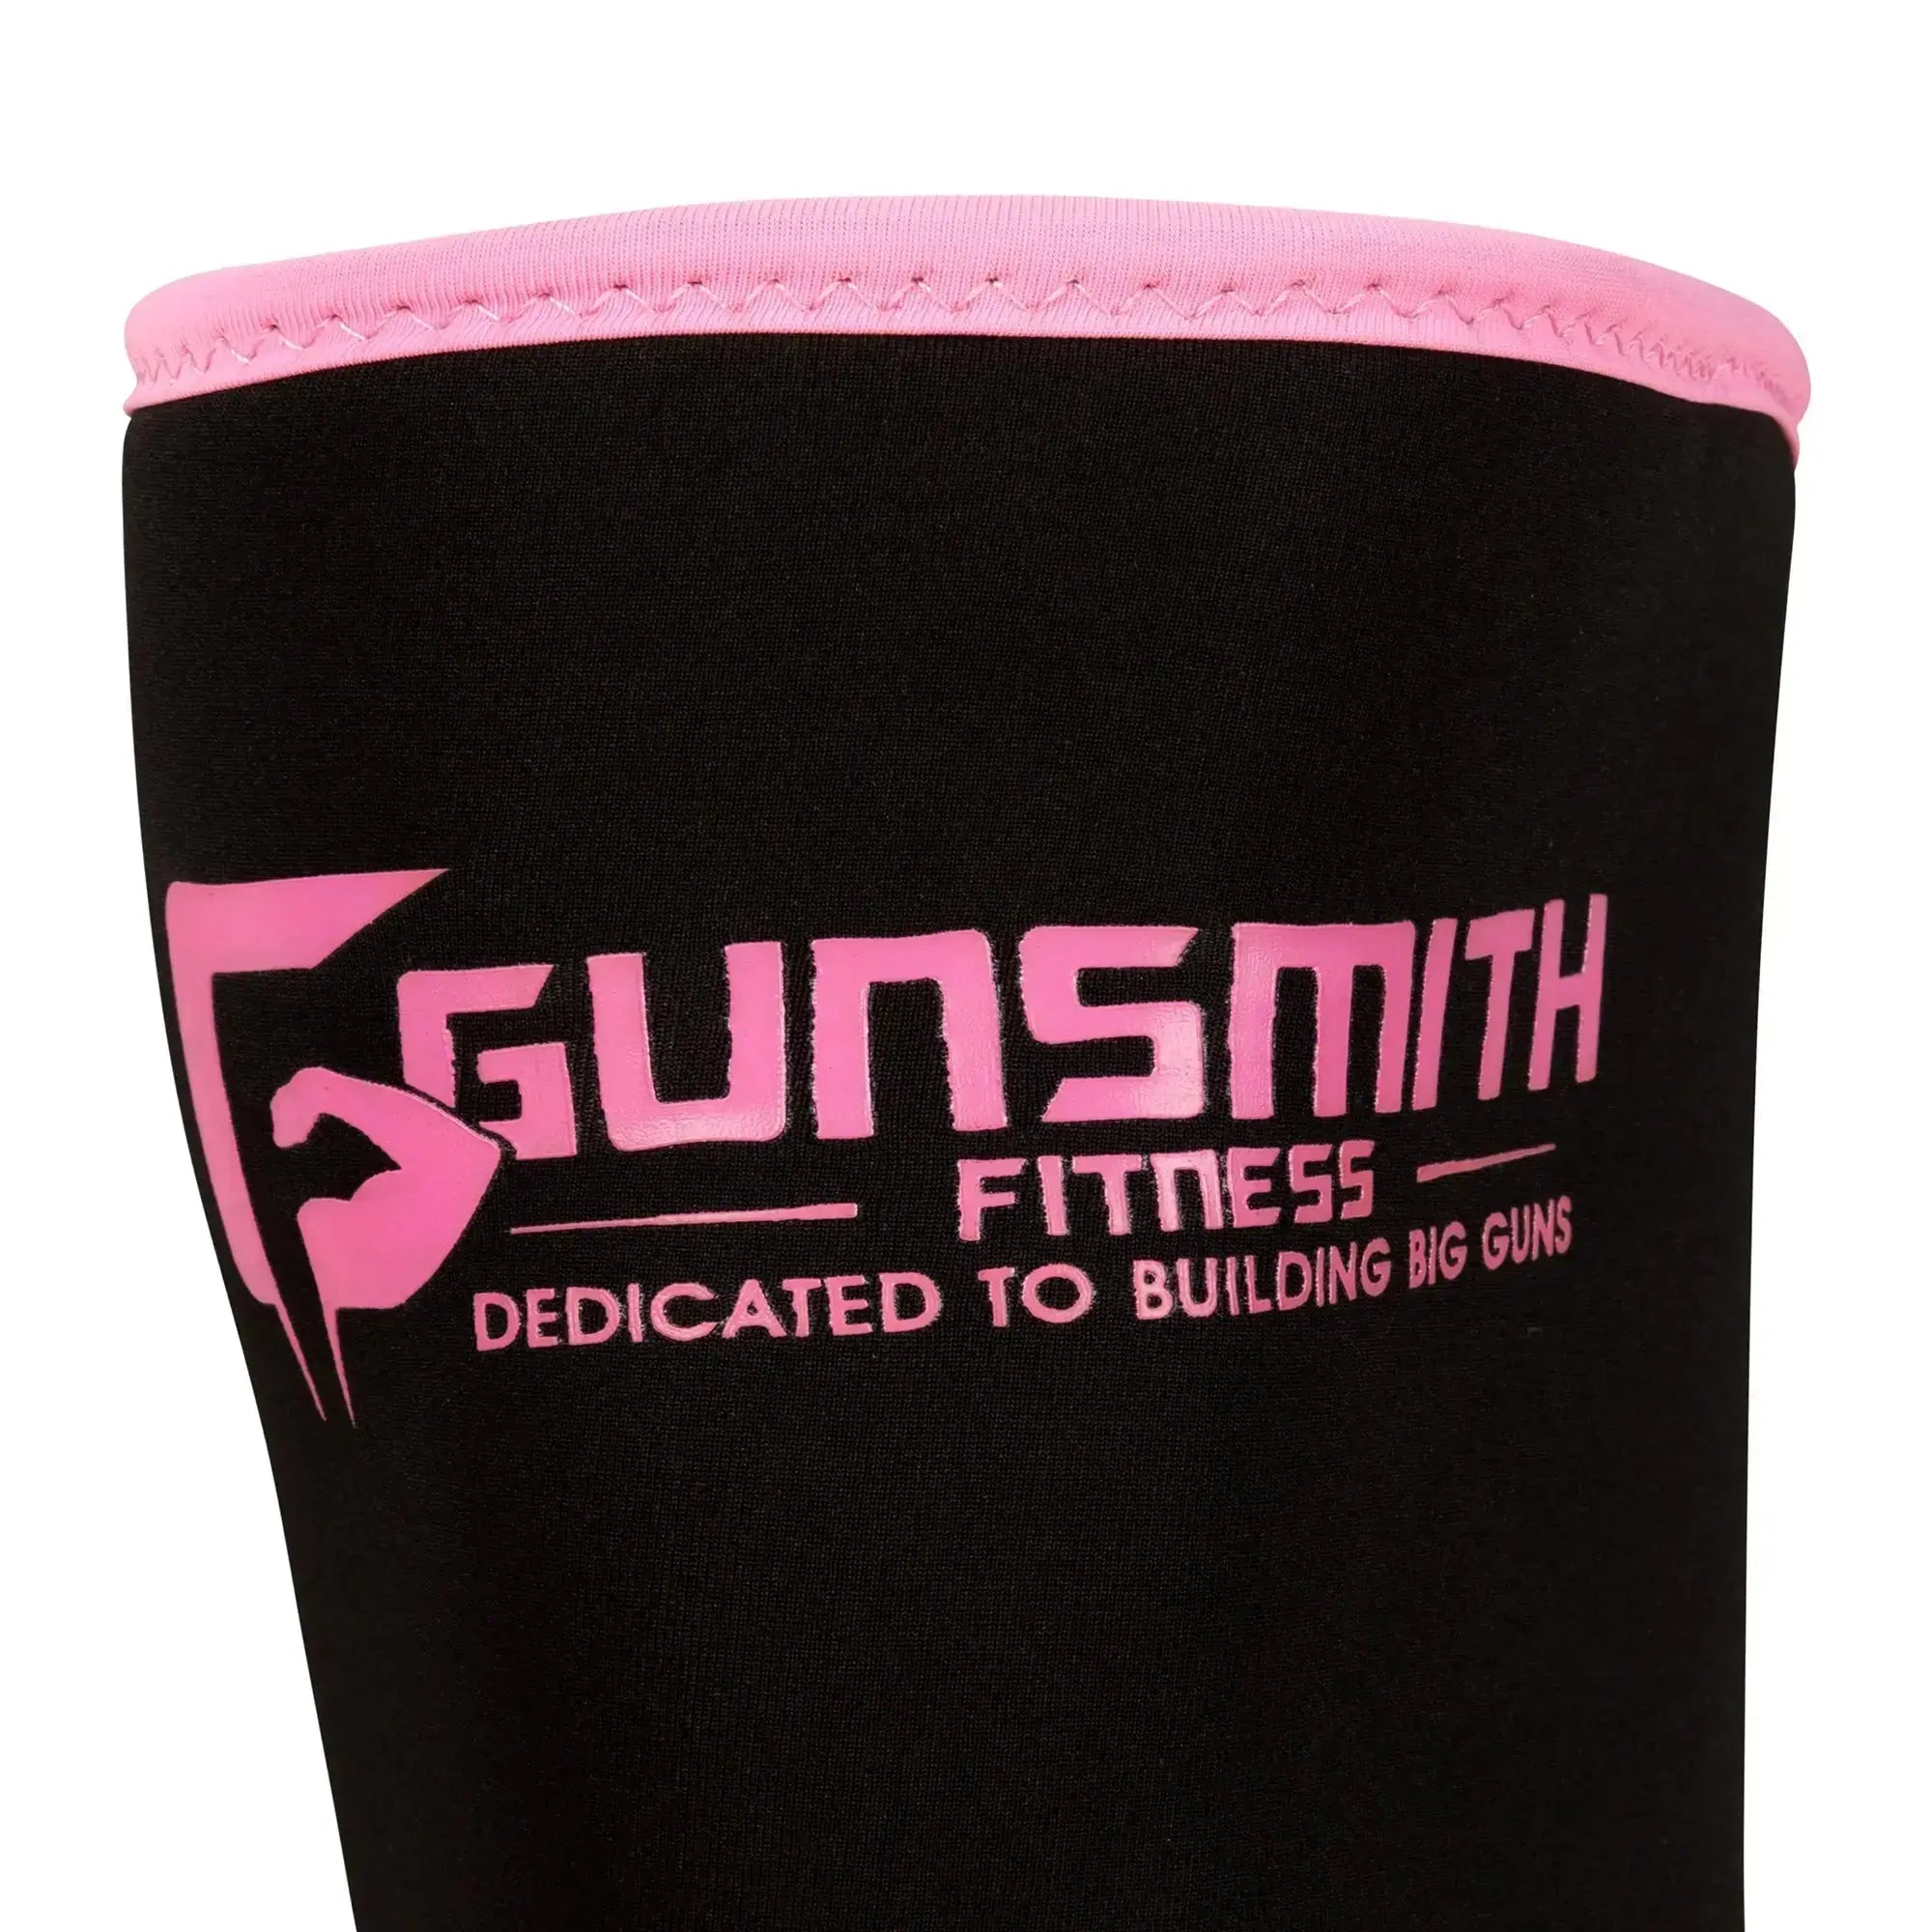 Knee Protection for Big Lifts: Wraps or Sleeves - Gunsmith Fitness